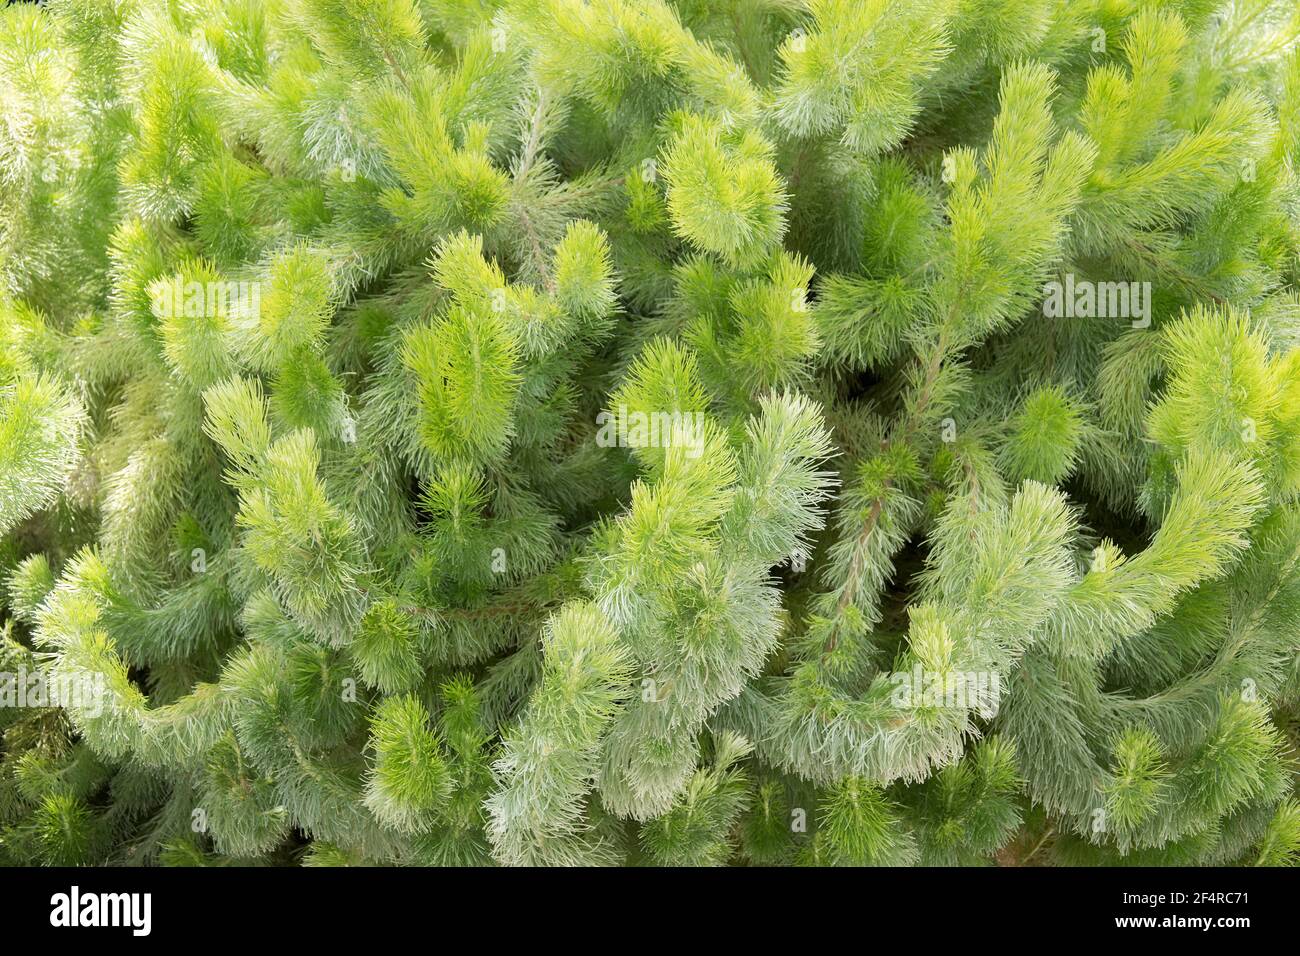 Adenanthos sericeus also commonly known as woolly bush. Stock Photo